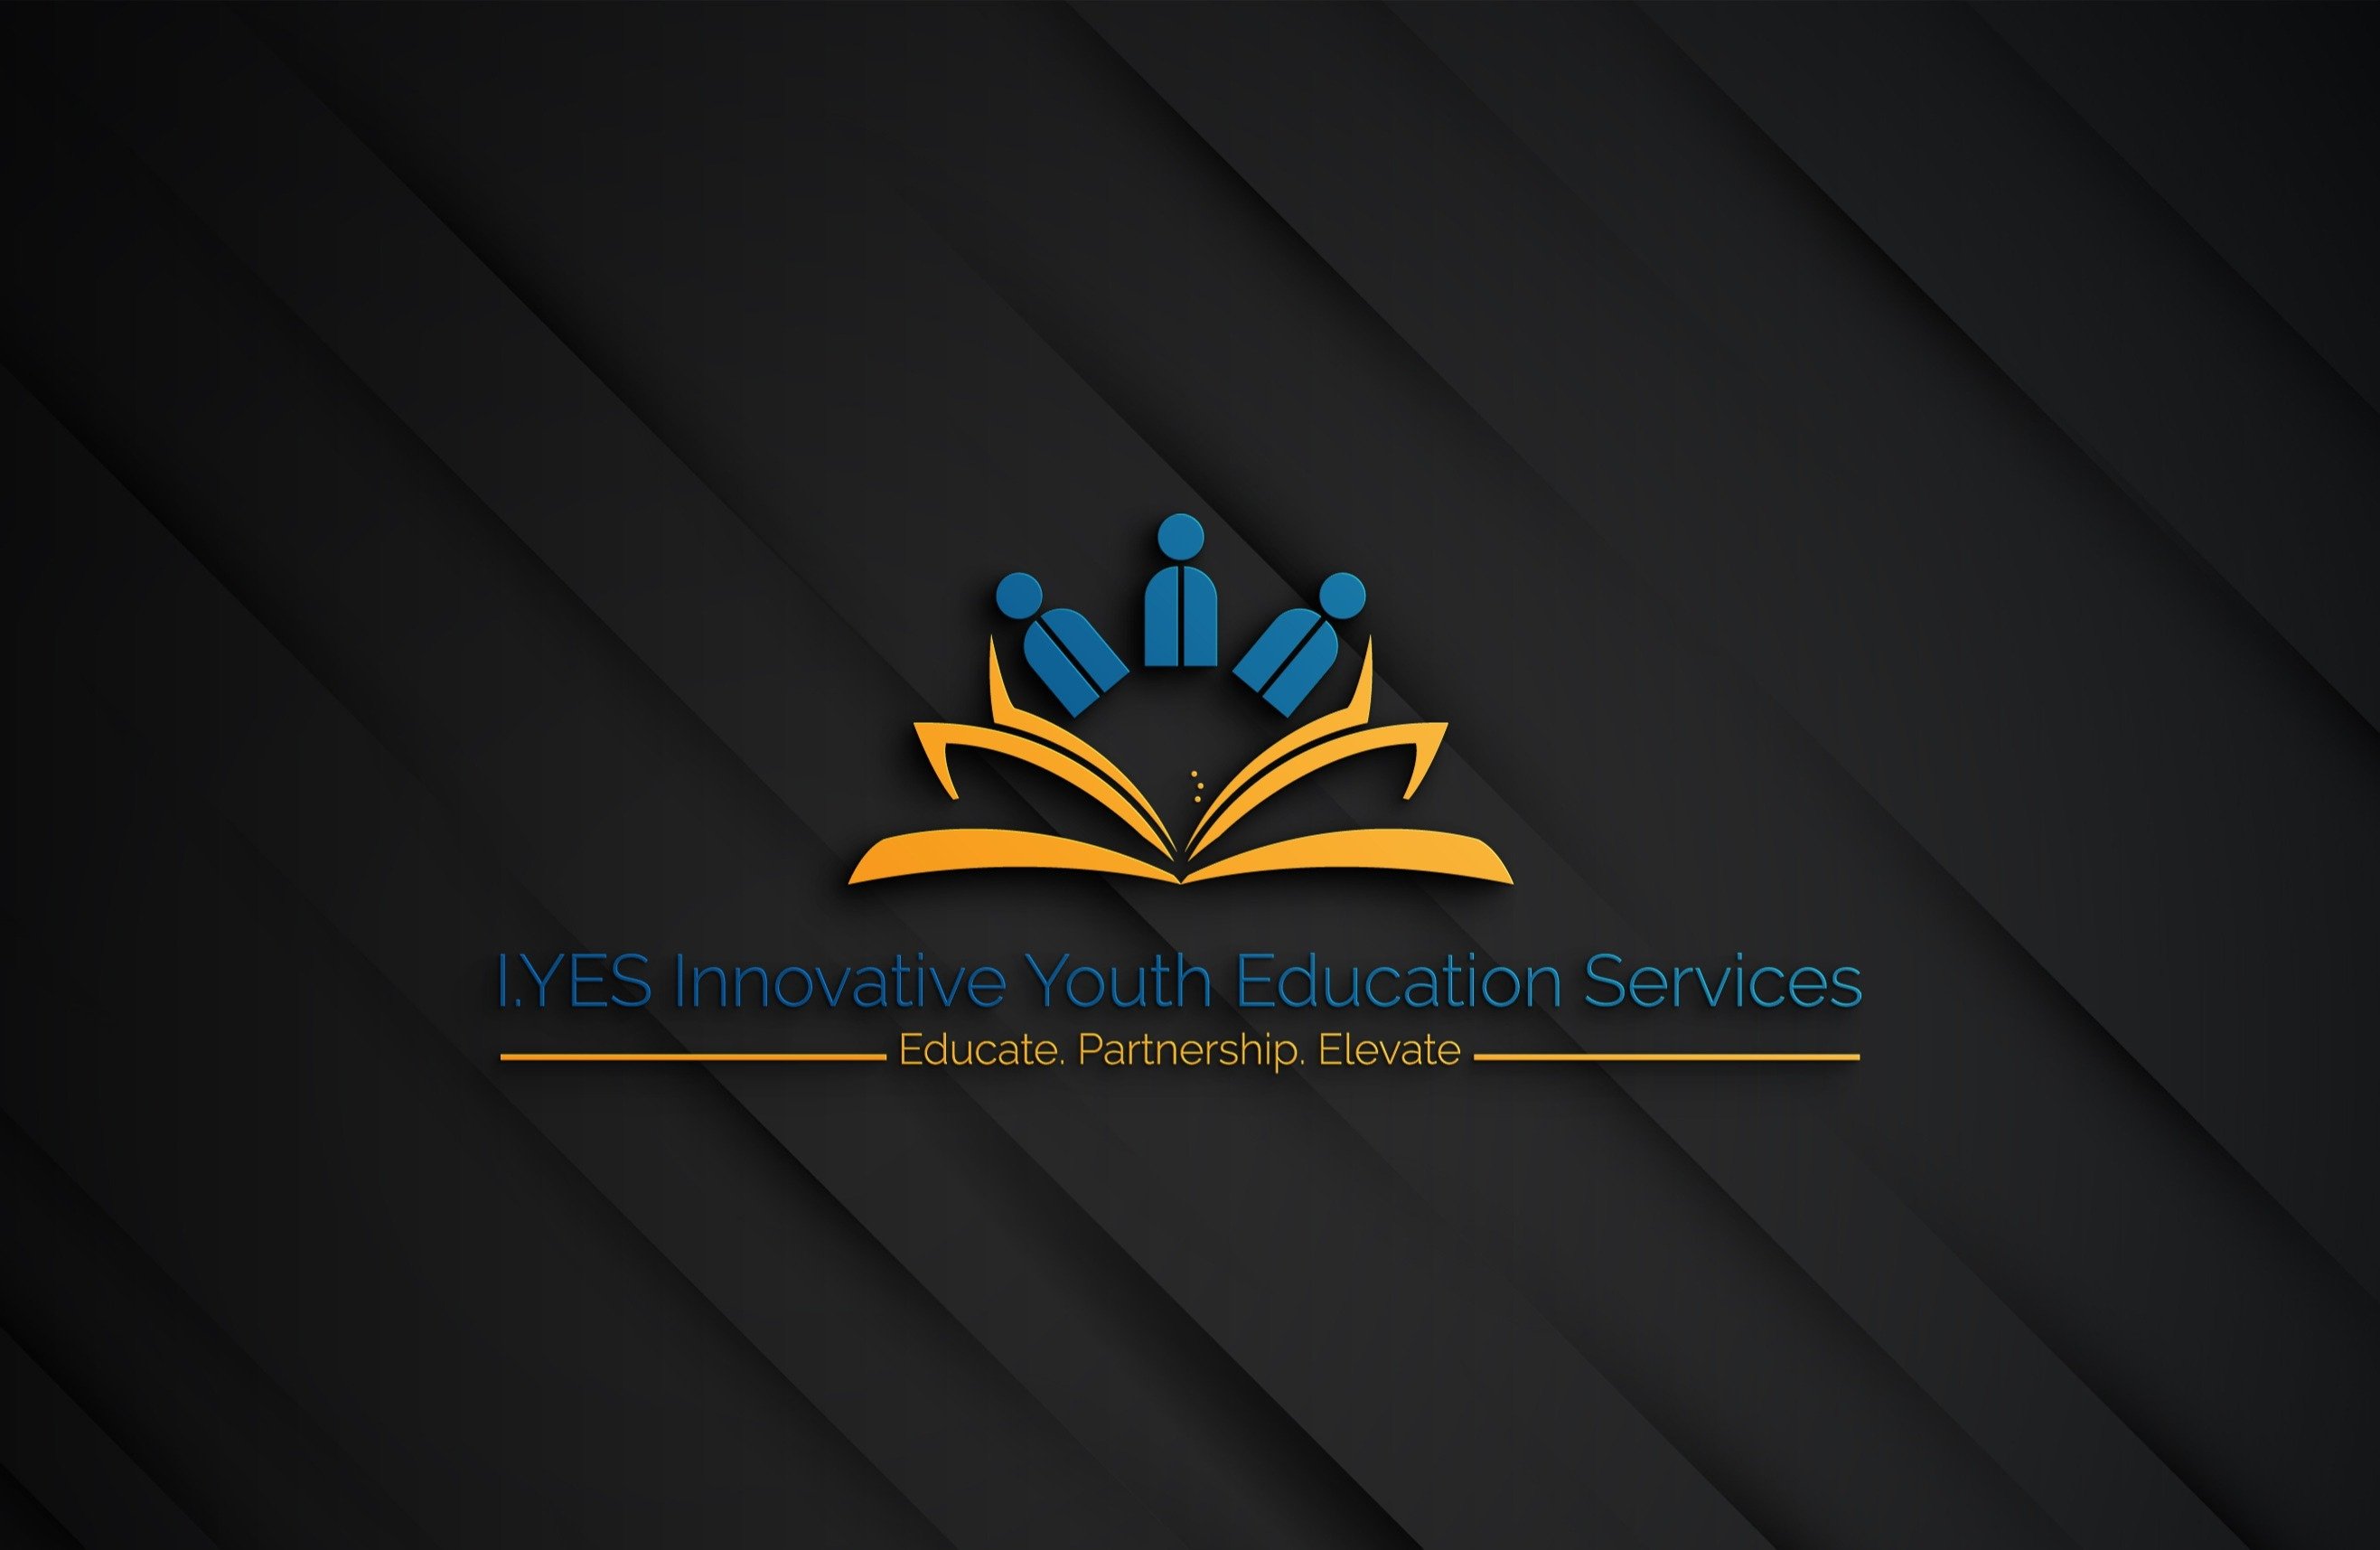 IYES Innovative Youth Education Services logo